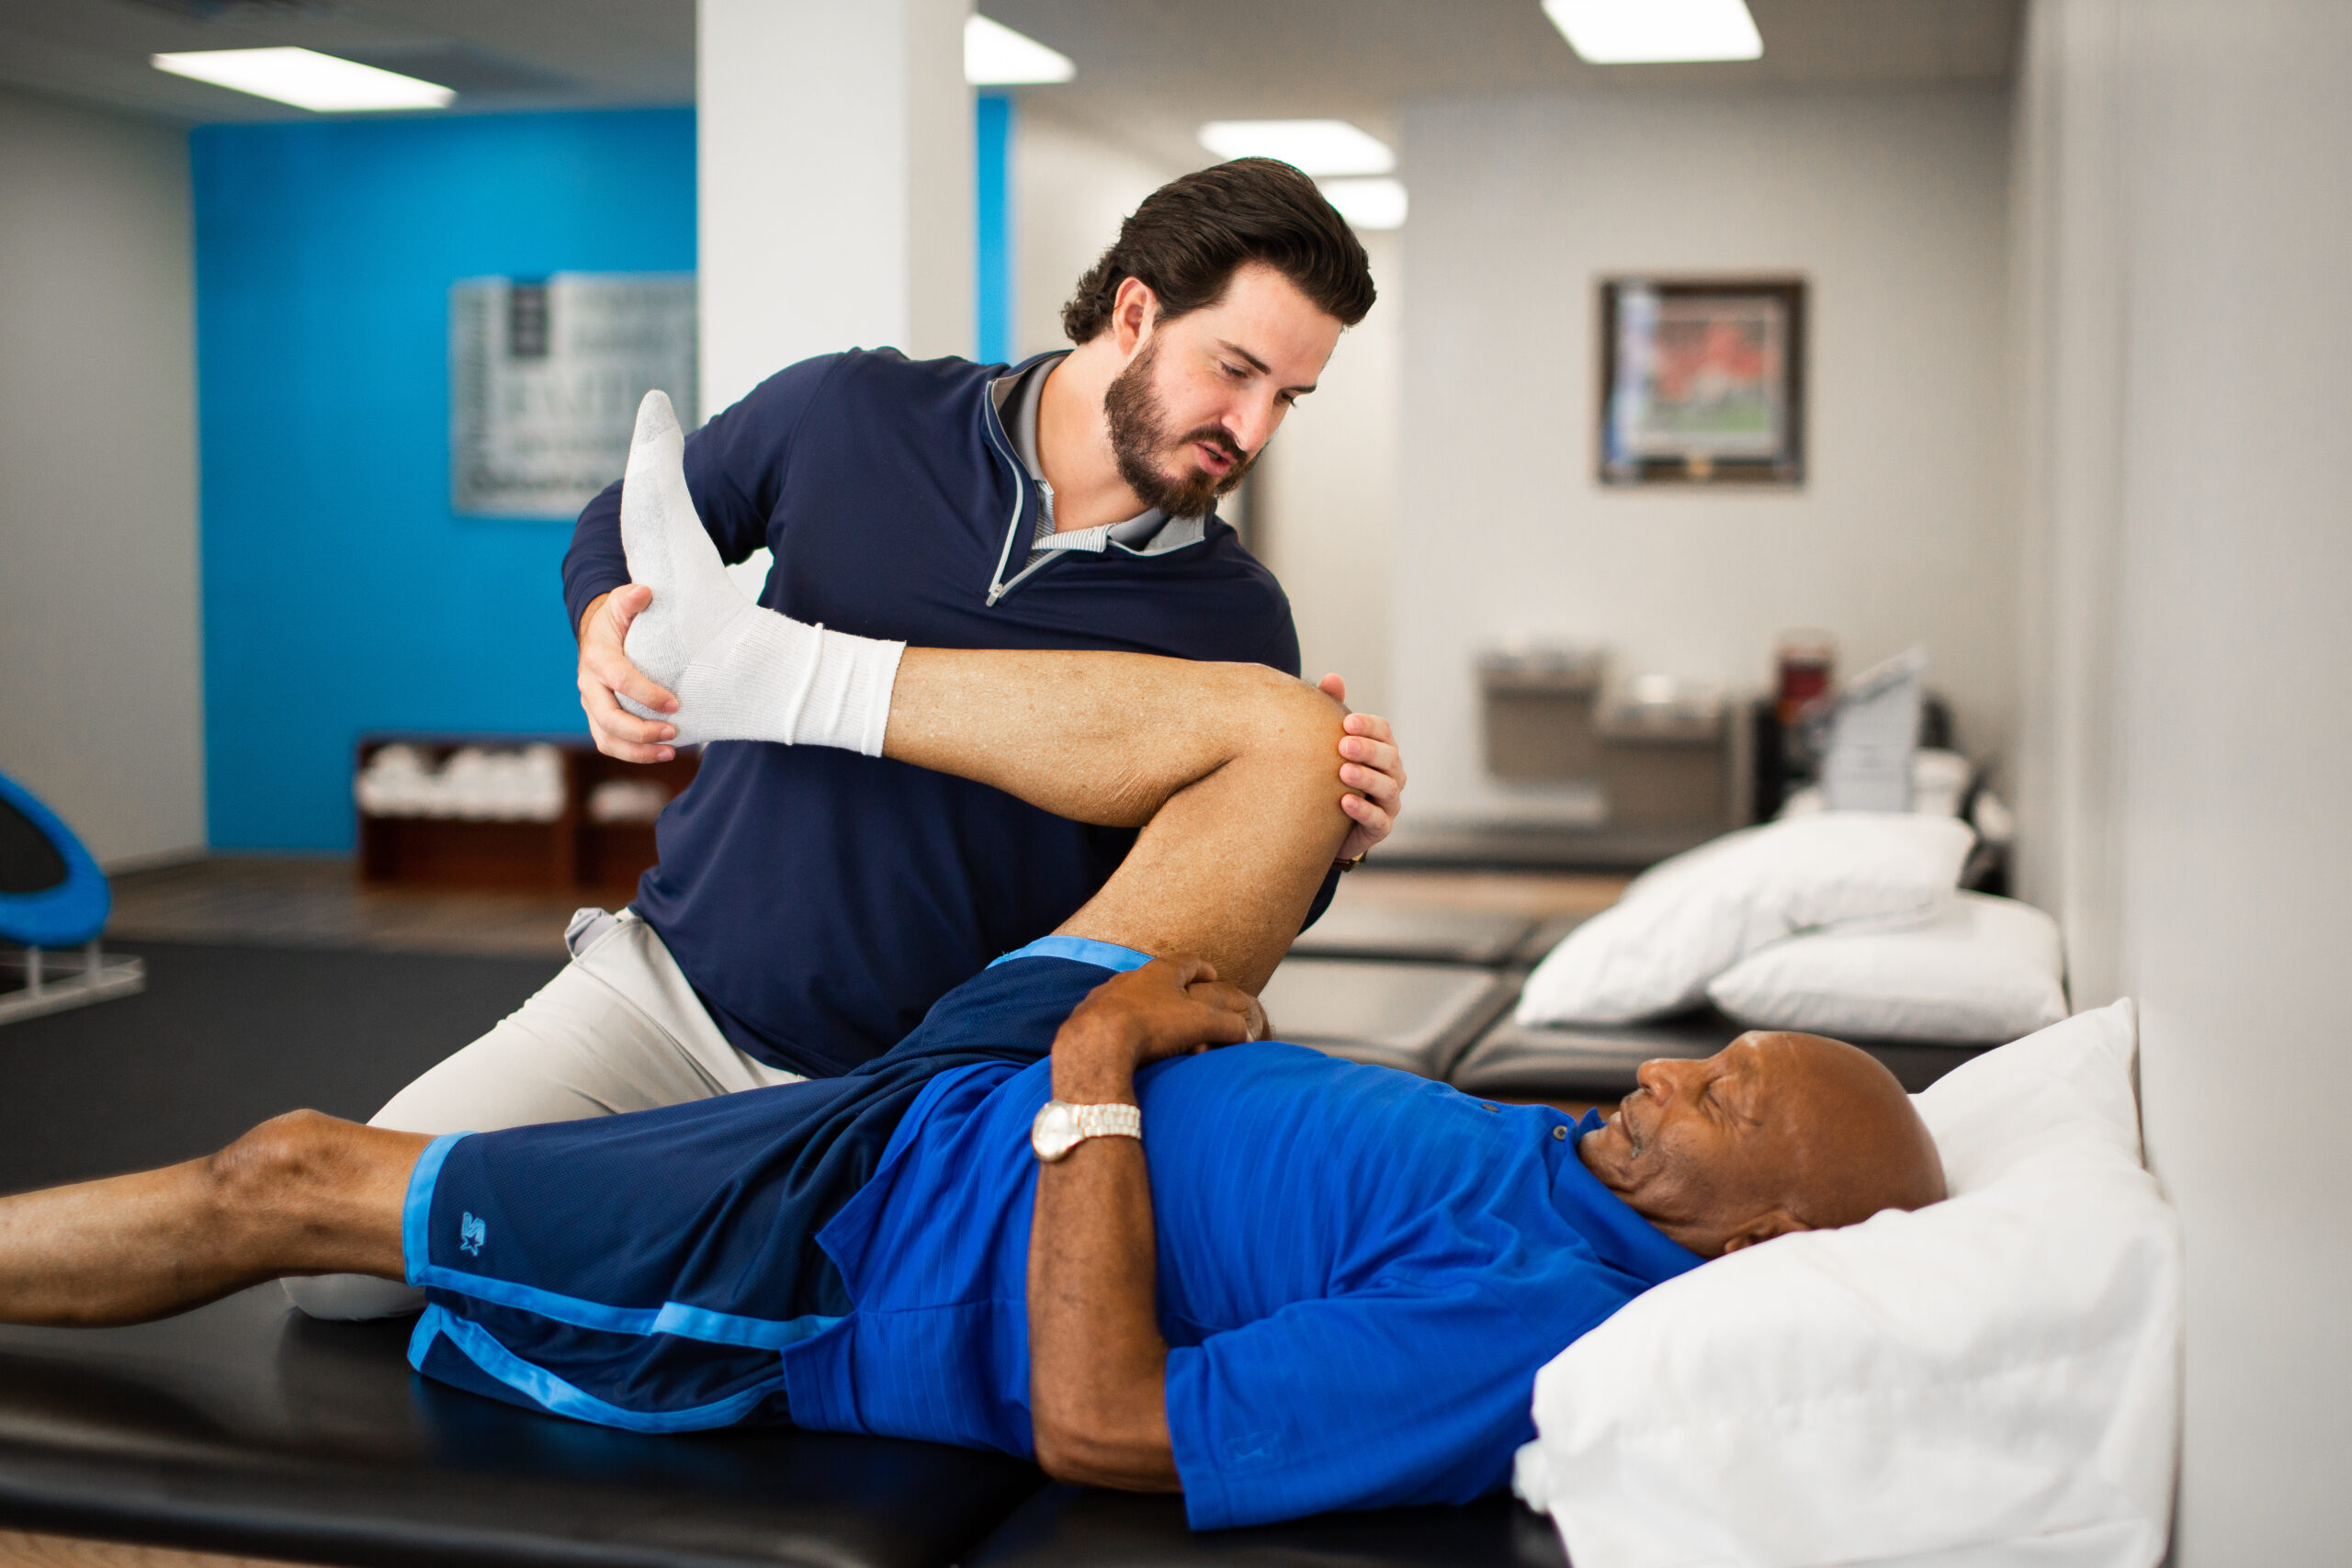 TherapySouth – Your Choice for Physical Therapy